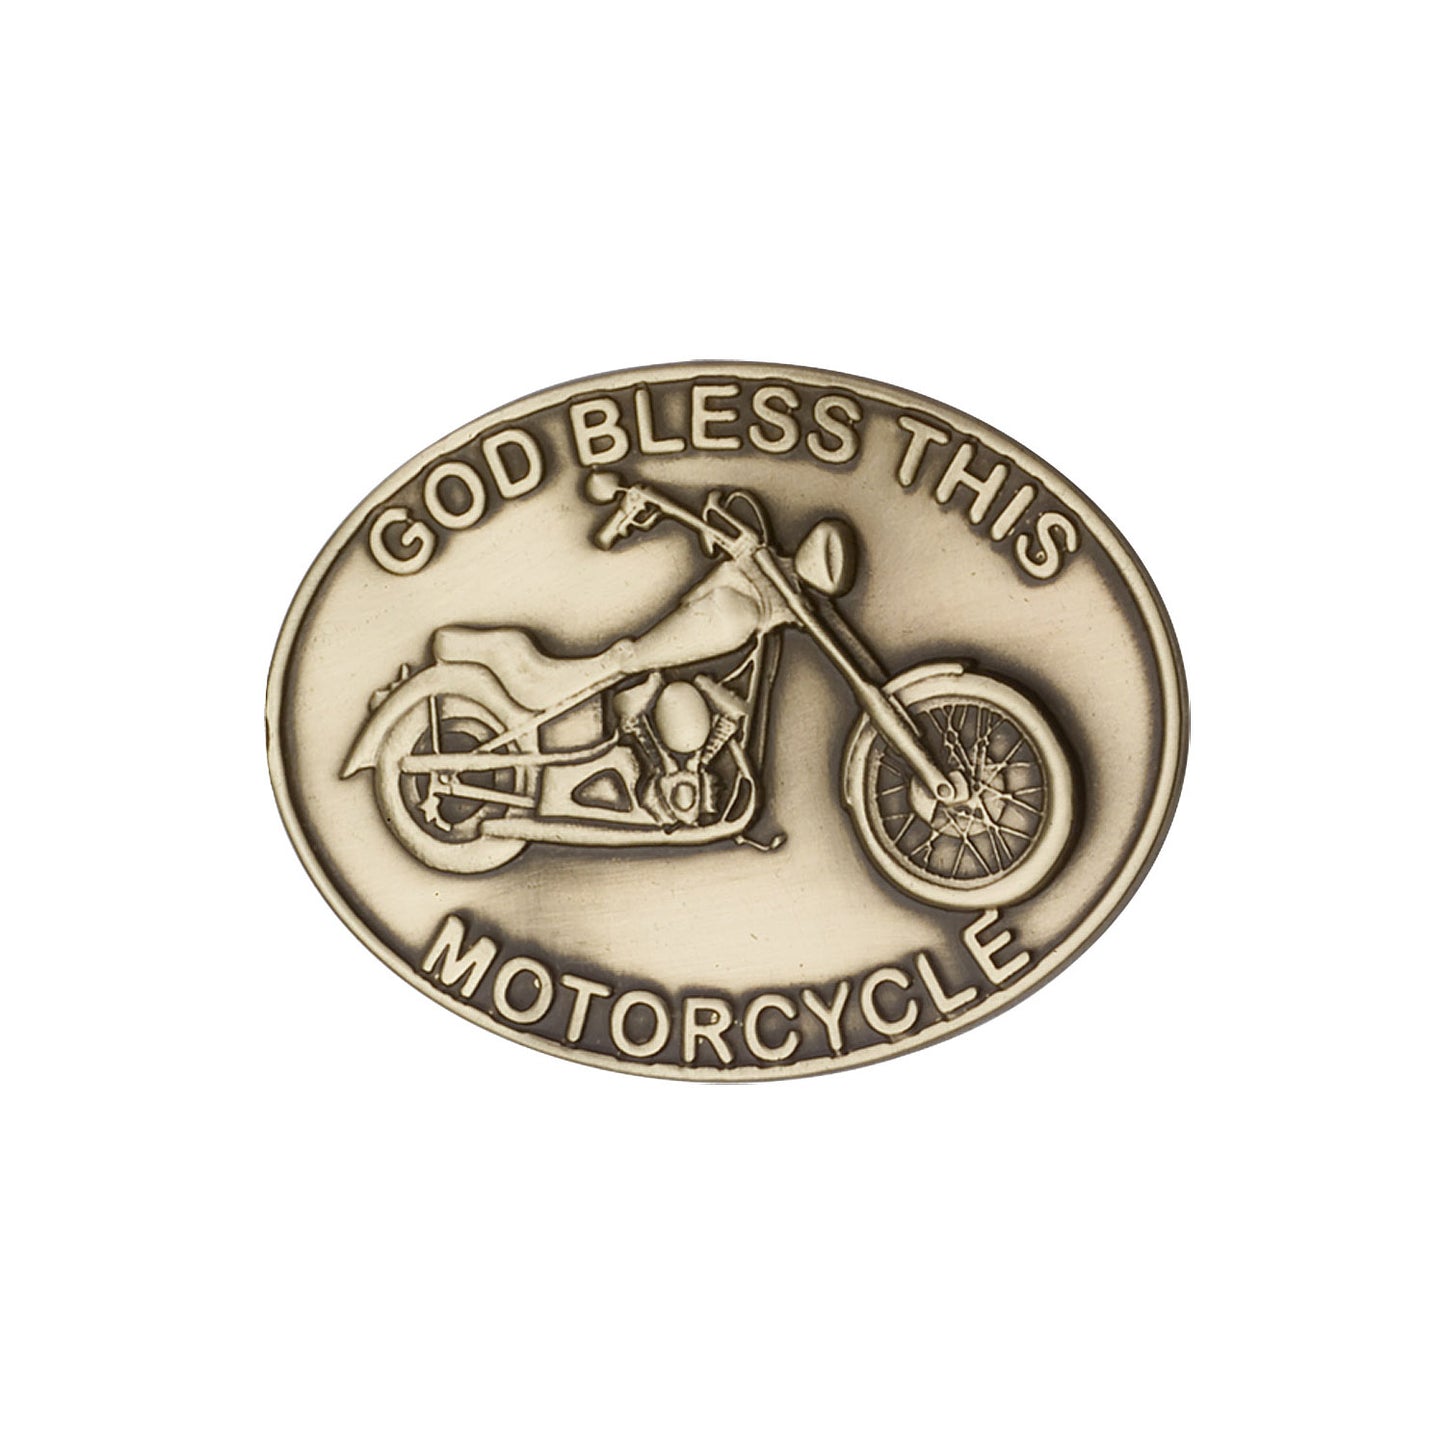 God Bless This Motorcycle Visor Clip